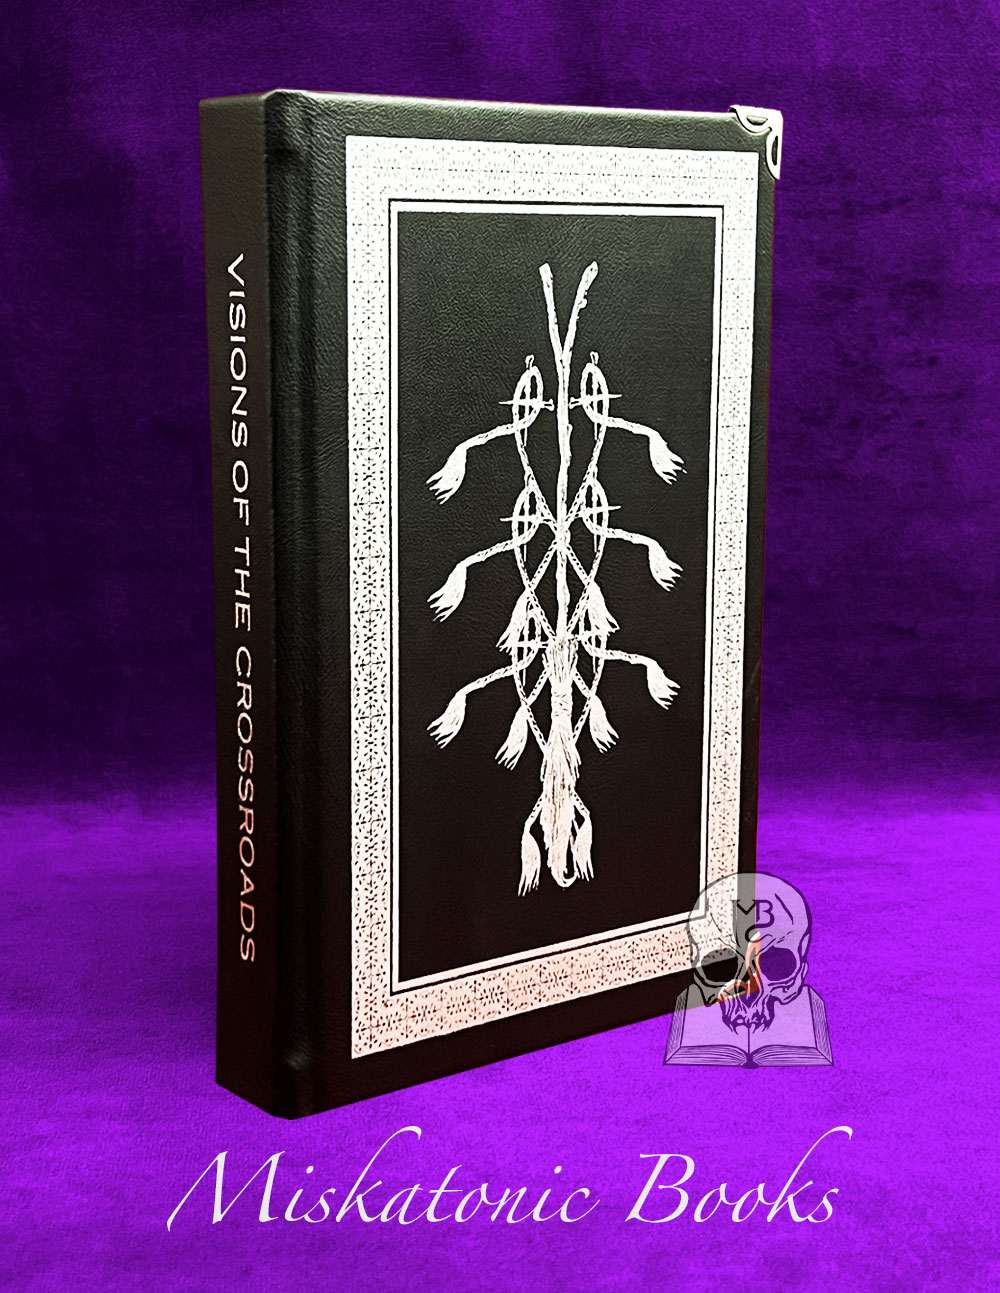 VISIONS OF THE CROSSROADS: The Art of a Wanderer in Traditional Witchcraft by Leonard Dewar (Deluxe Leather Bound Edition with Altar Cloth)